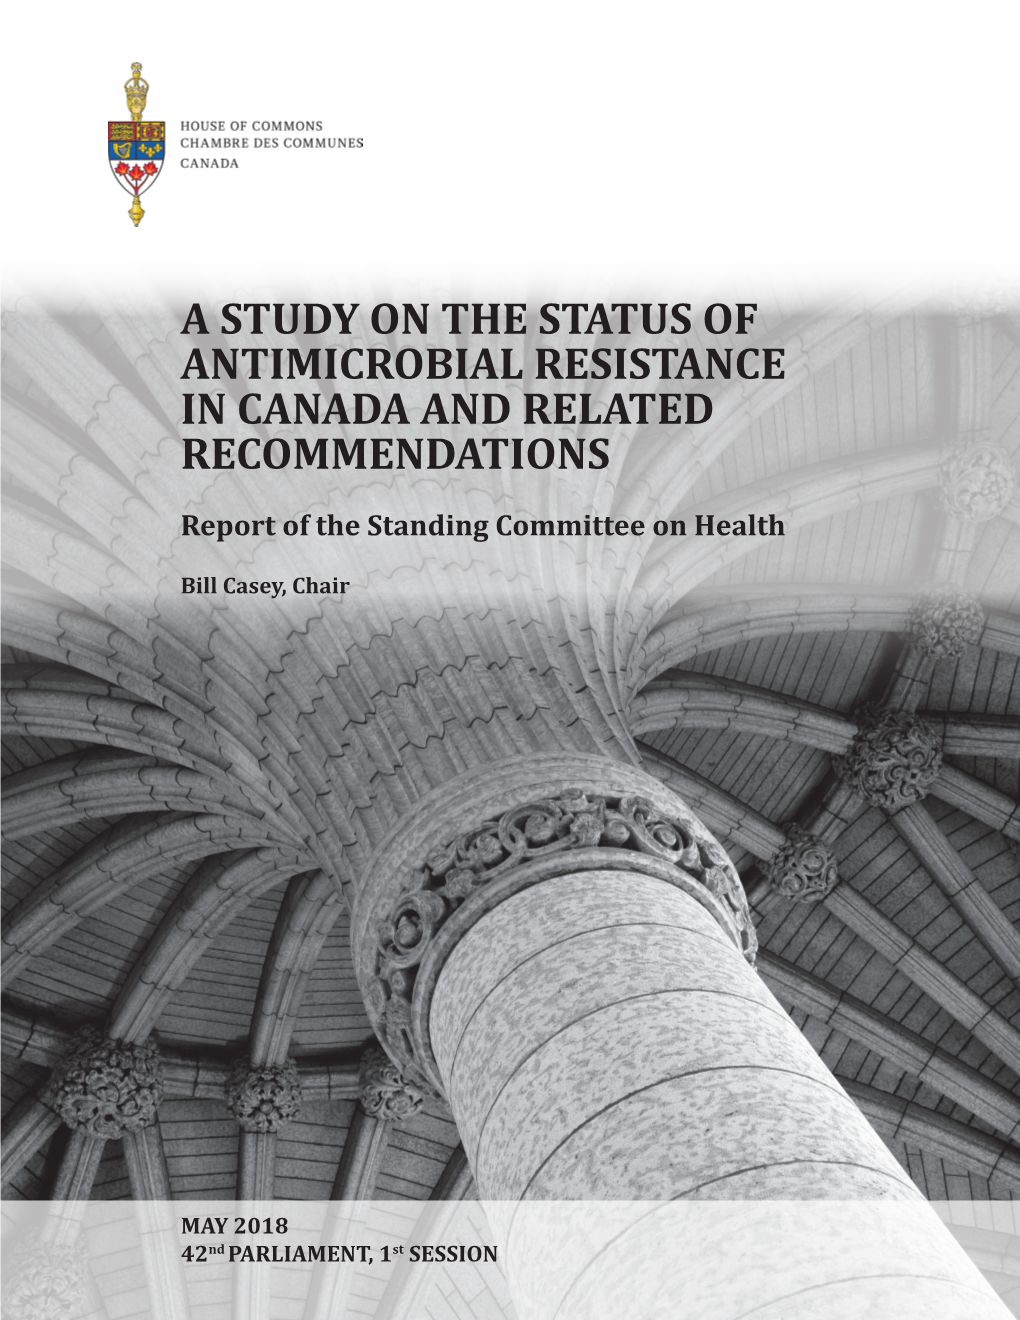 A Study on the Status of Antimicrobial Resistance in Canada and Related Recommendations